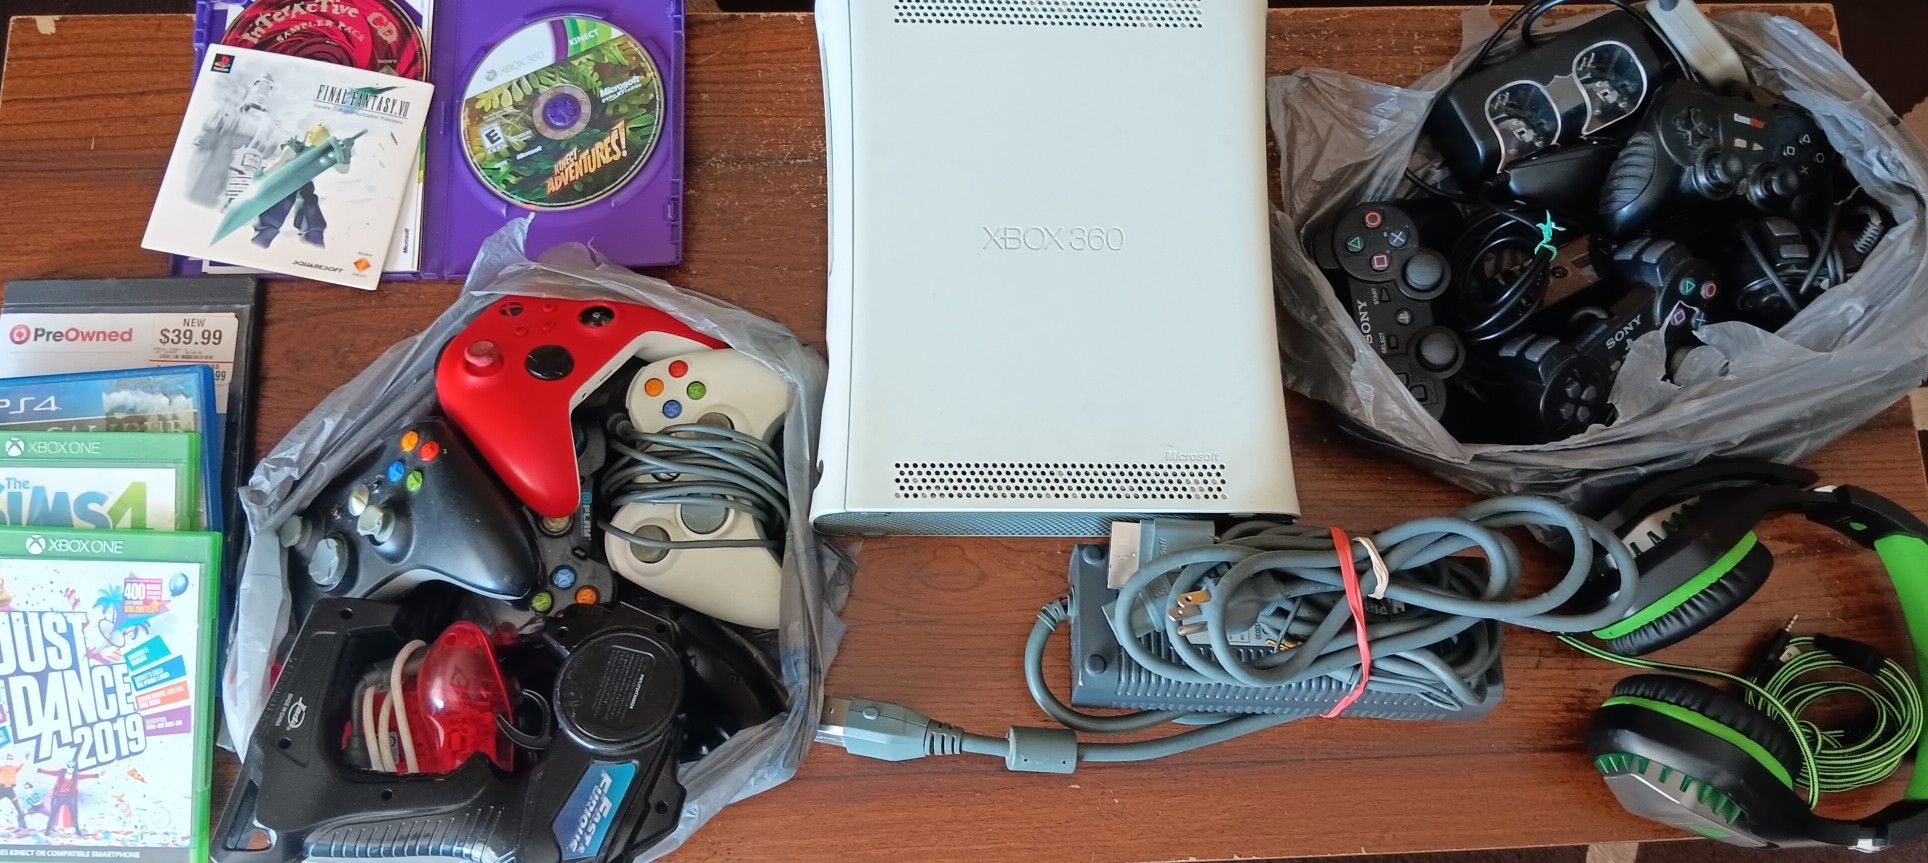 parts/repair LOT of video game stuff- Xbox 360 Console w/adapter DPSN-186CB A controllers games etc